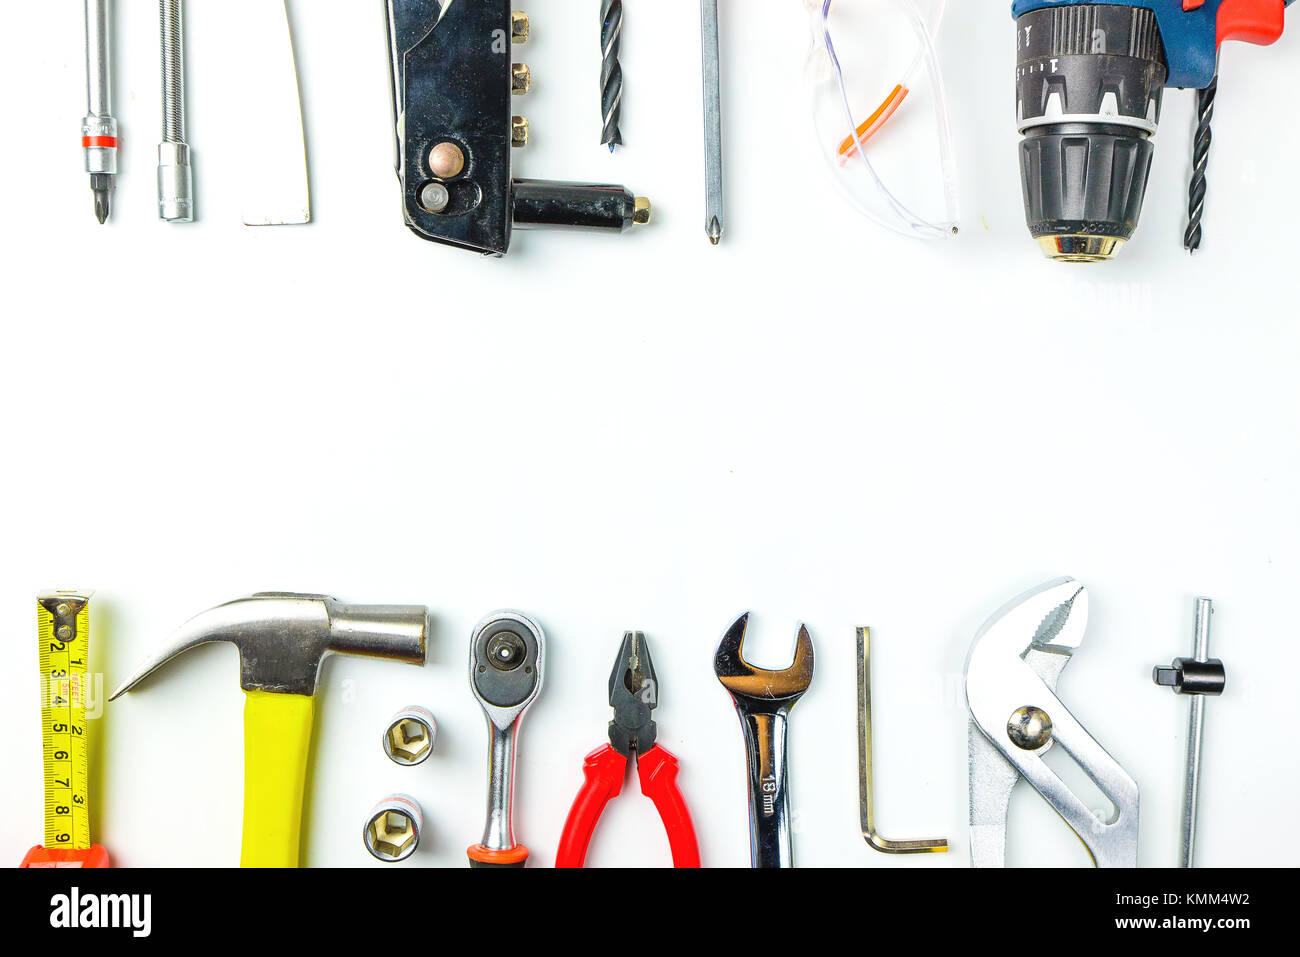 Top view of Working tools,wrench,socket wrench,hammer,screwdriver,plier,electric drill,tape measure,machinist square and safety glasses on white backg Stock Photo